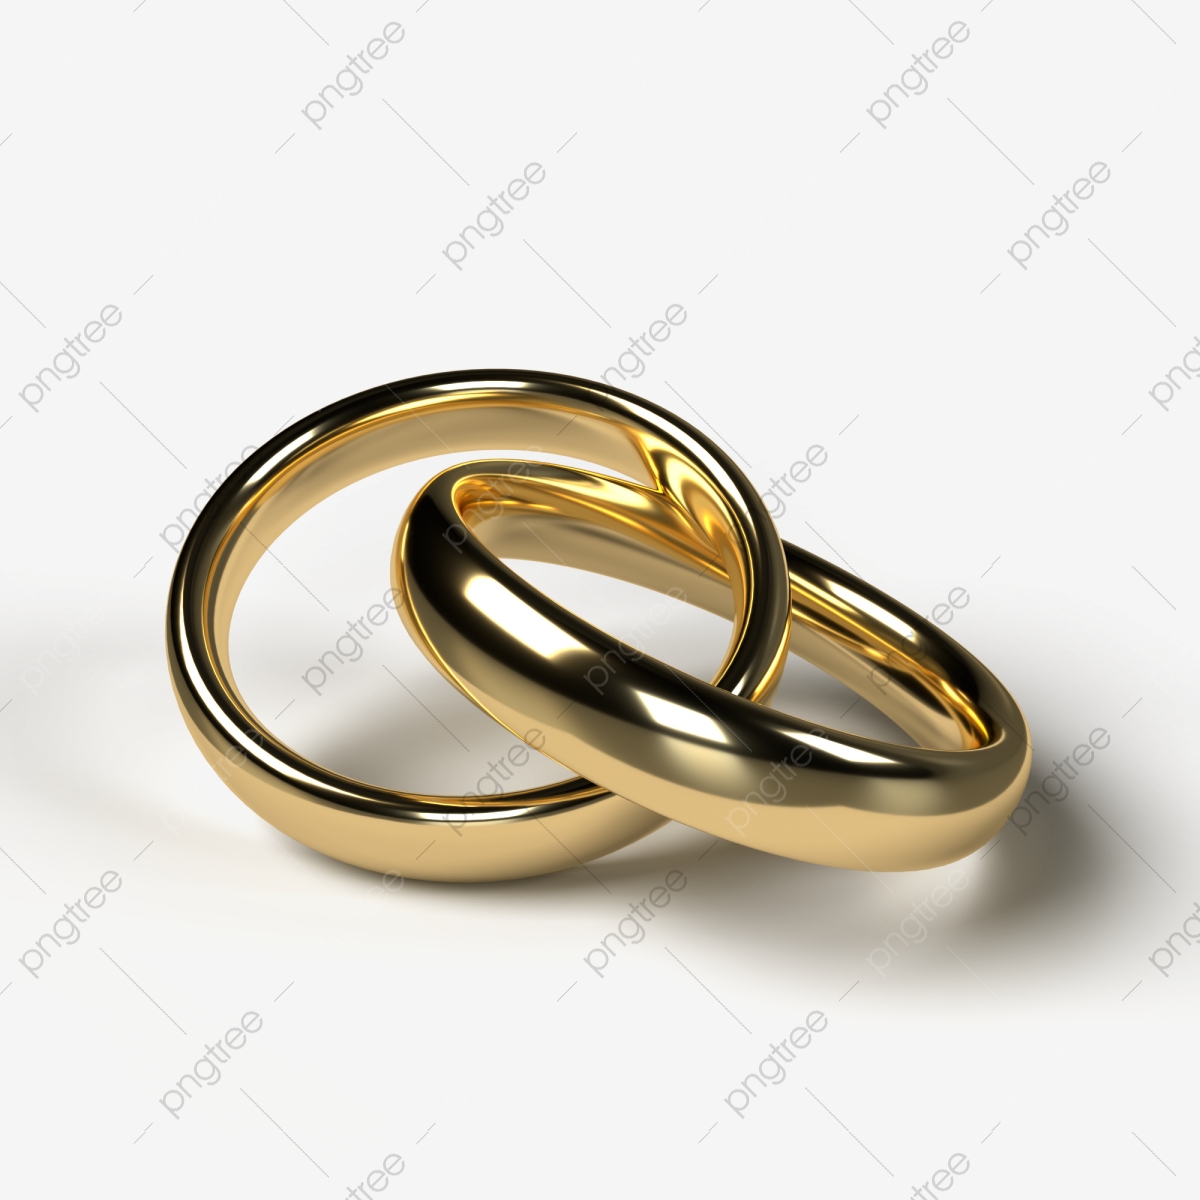 A Pair Of Beautiful Golden Wedding Rings On A Transparent Background